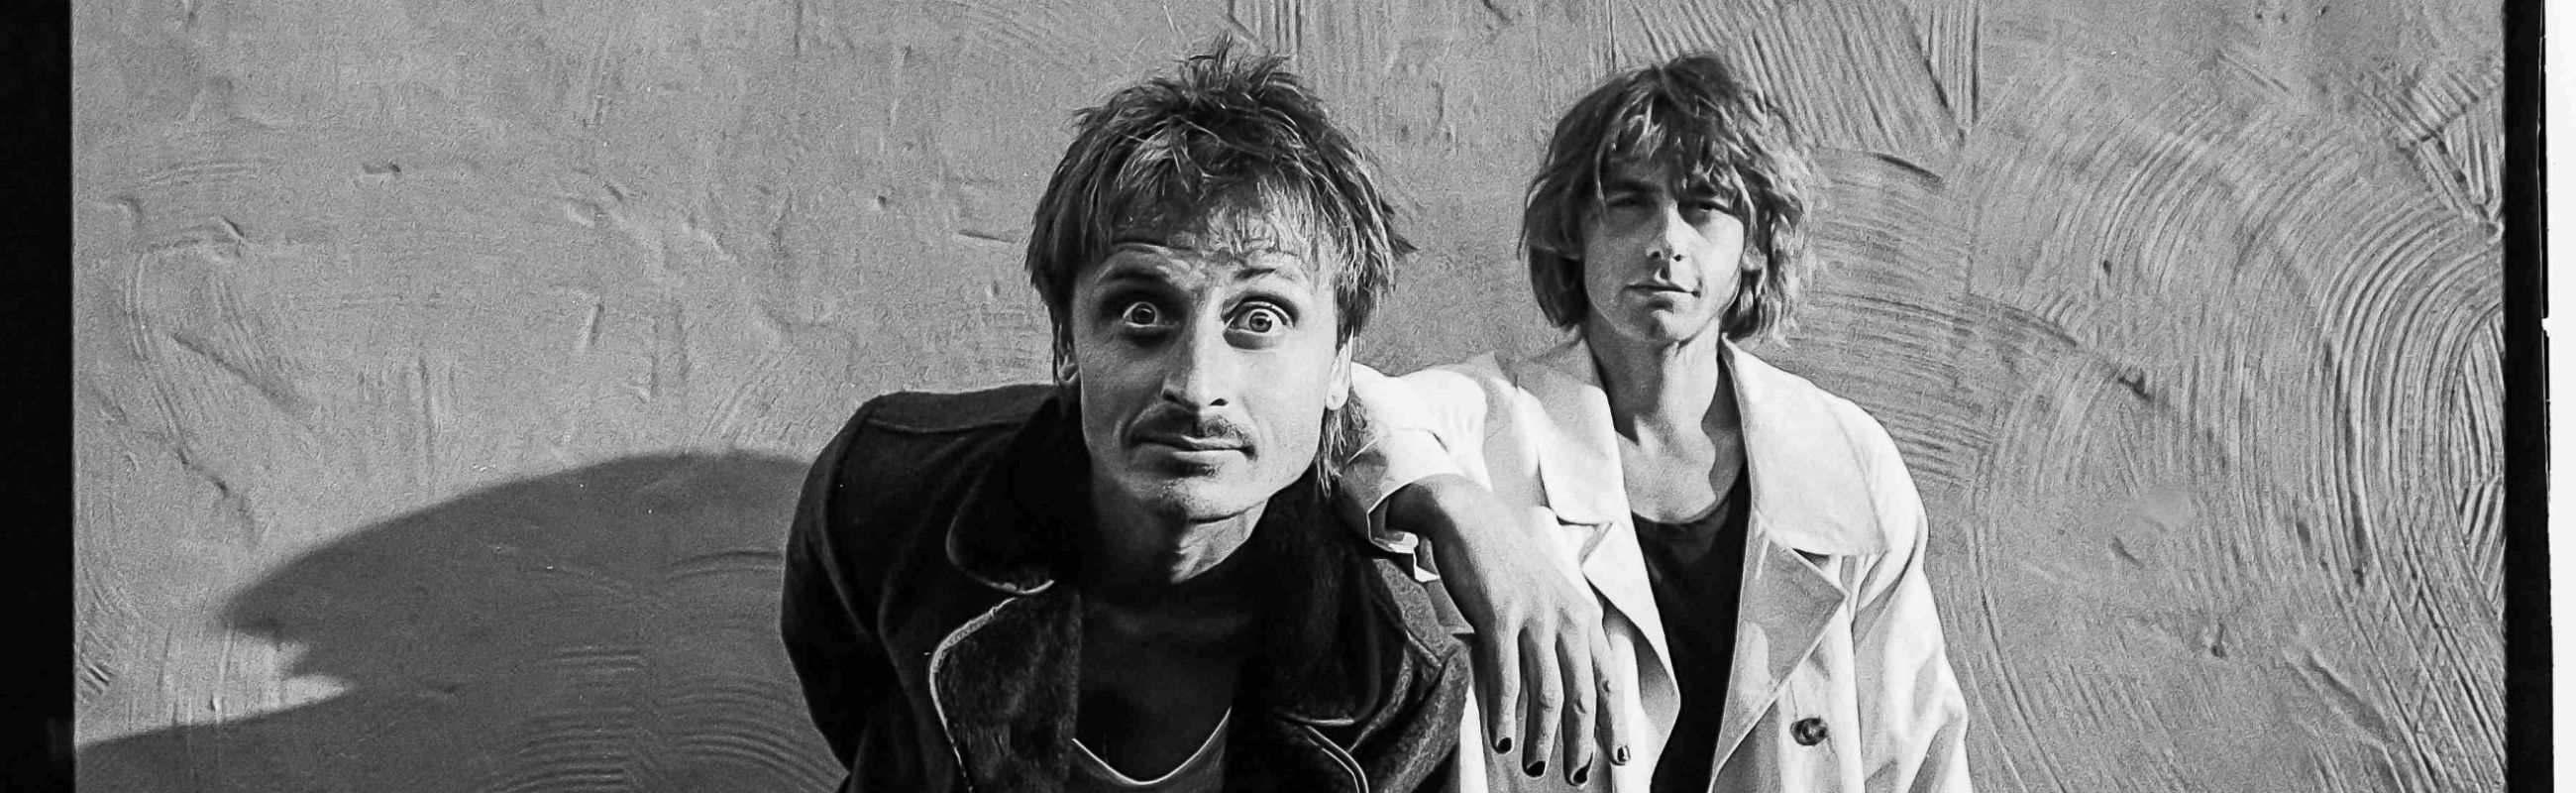 LIME CORDIALE PHOTO